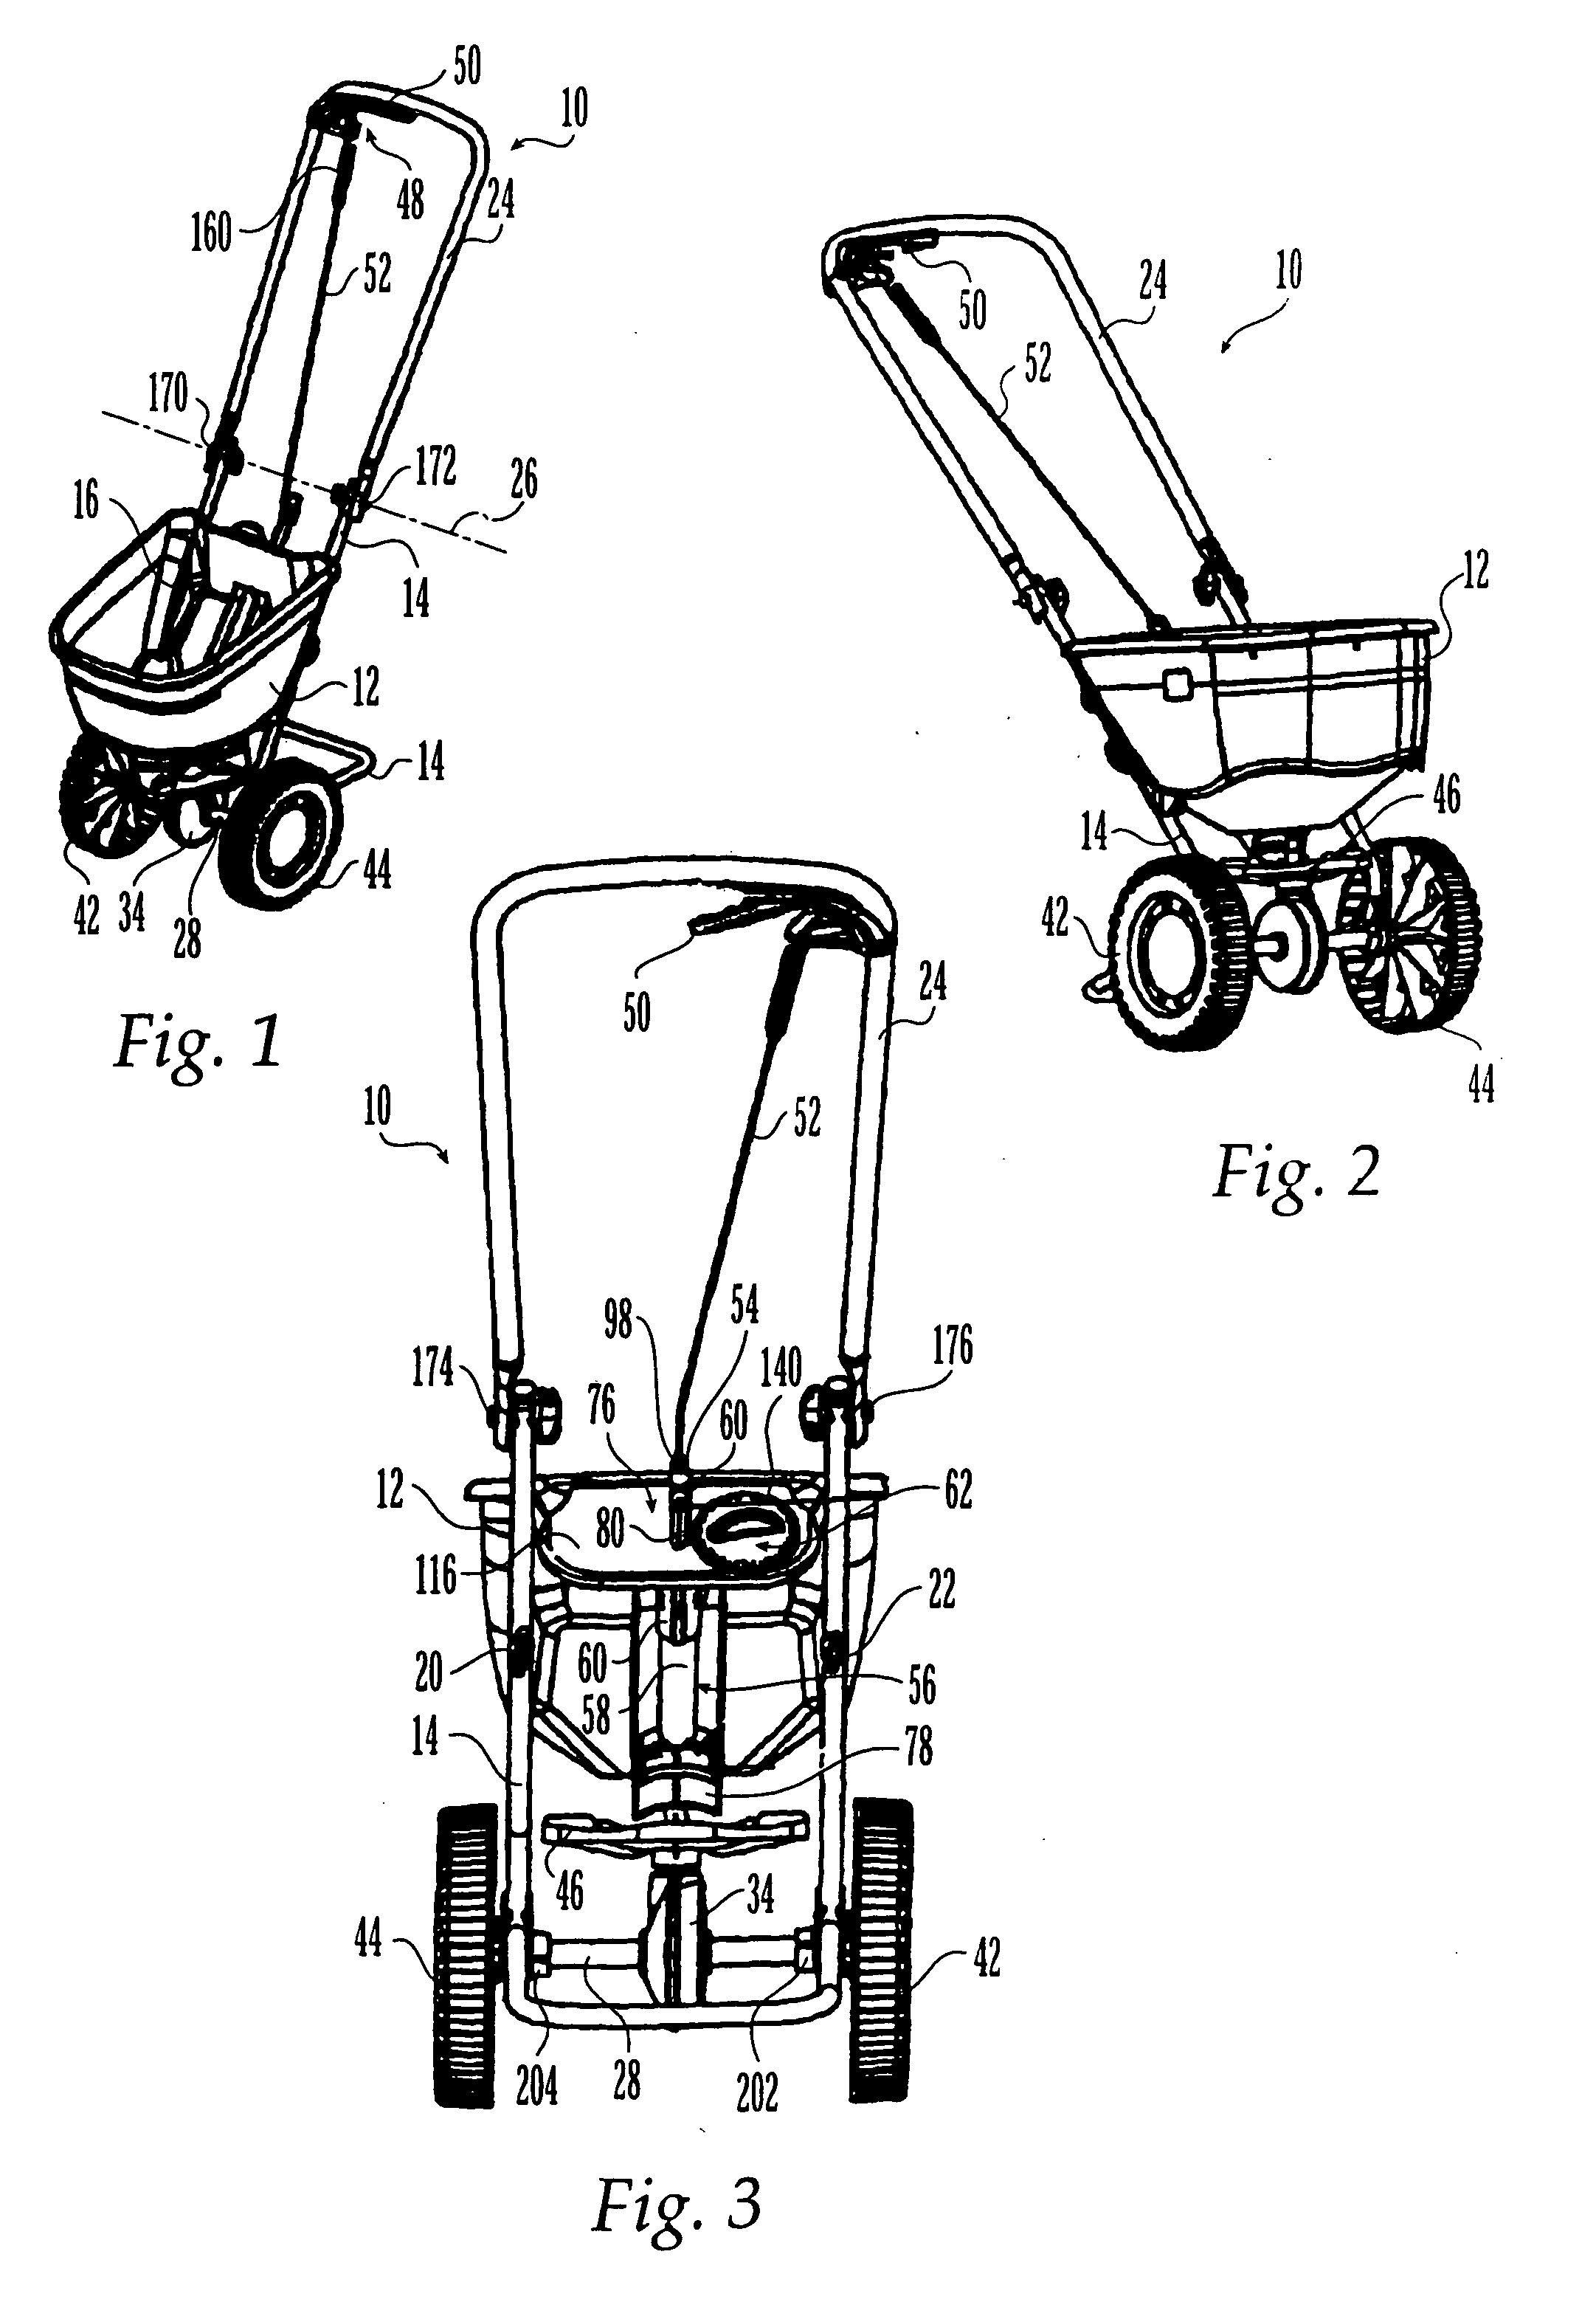 Collapsible spreader